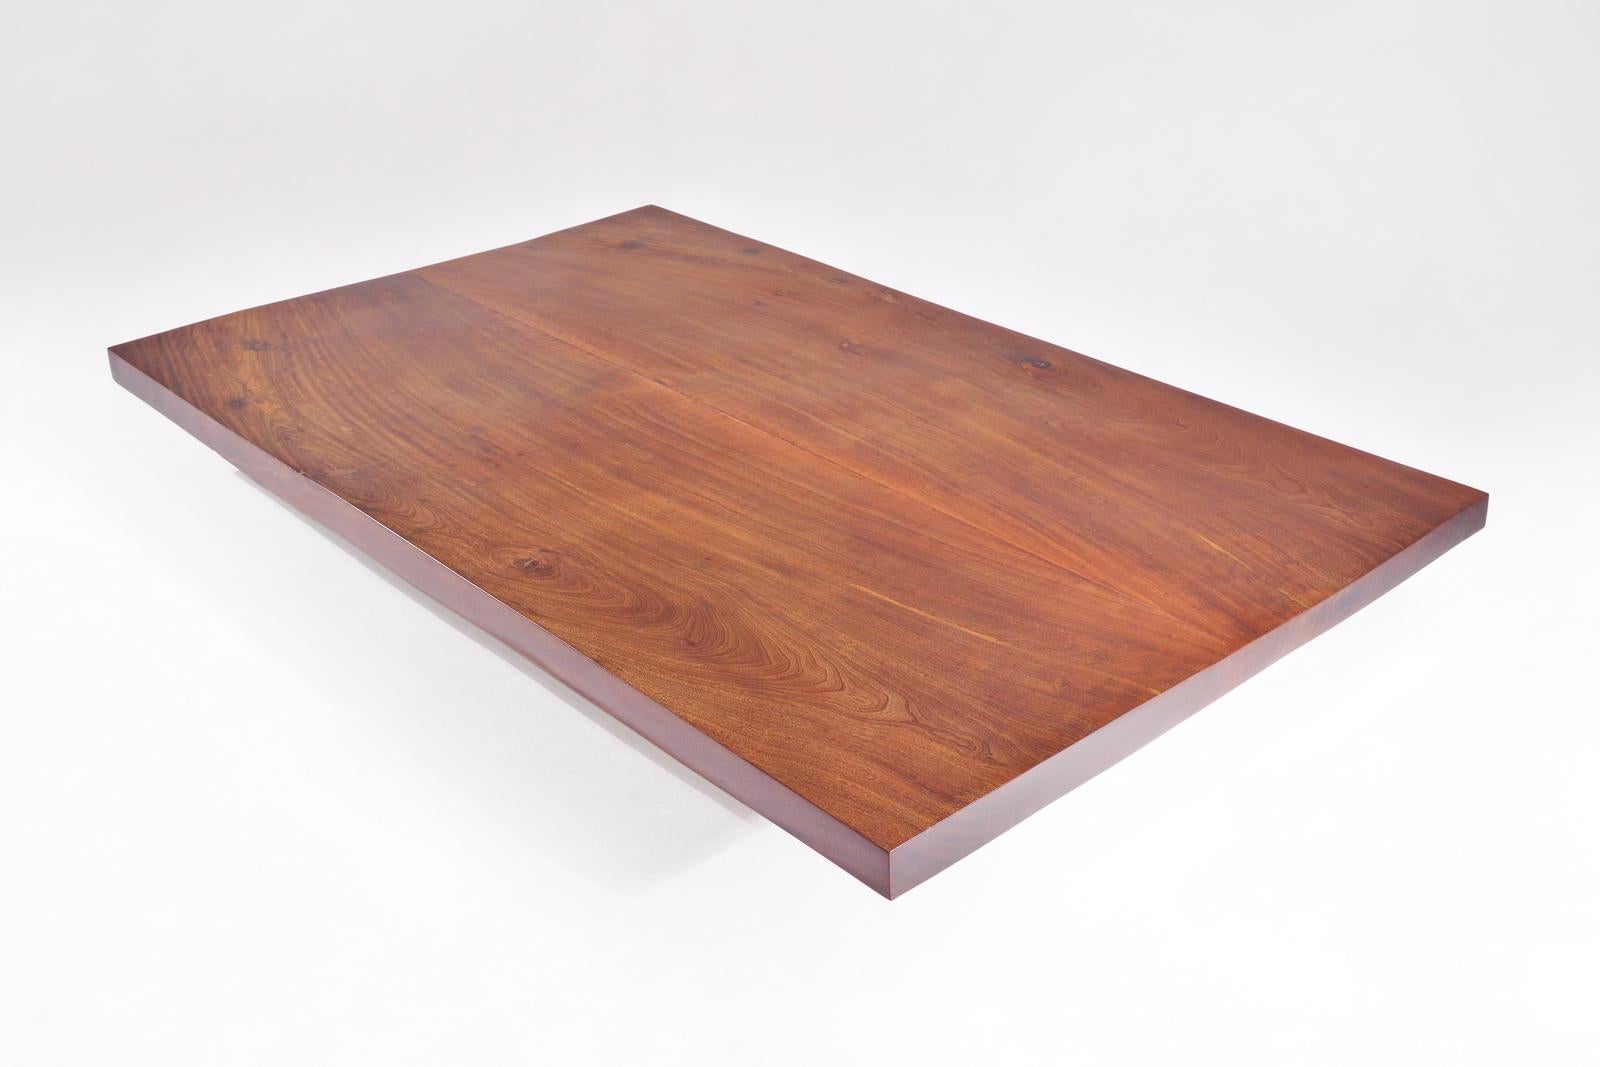 Hand-Crafted Bespoke Low Table, Antique Hardwood Slab and Wood Bases, by P. Tendercool For Sale